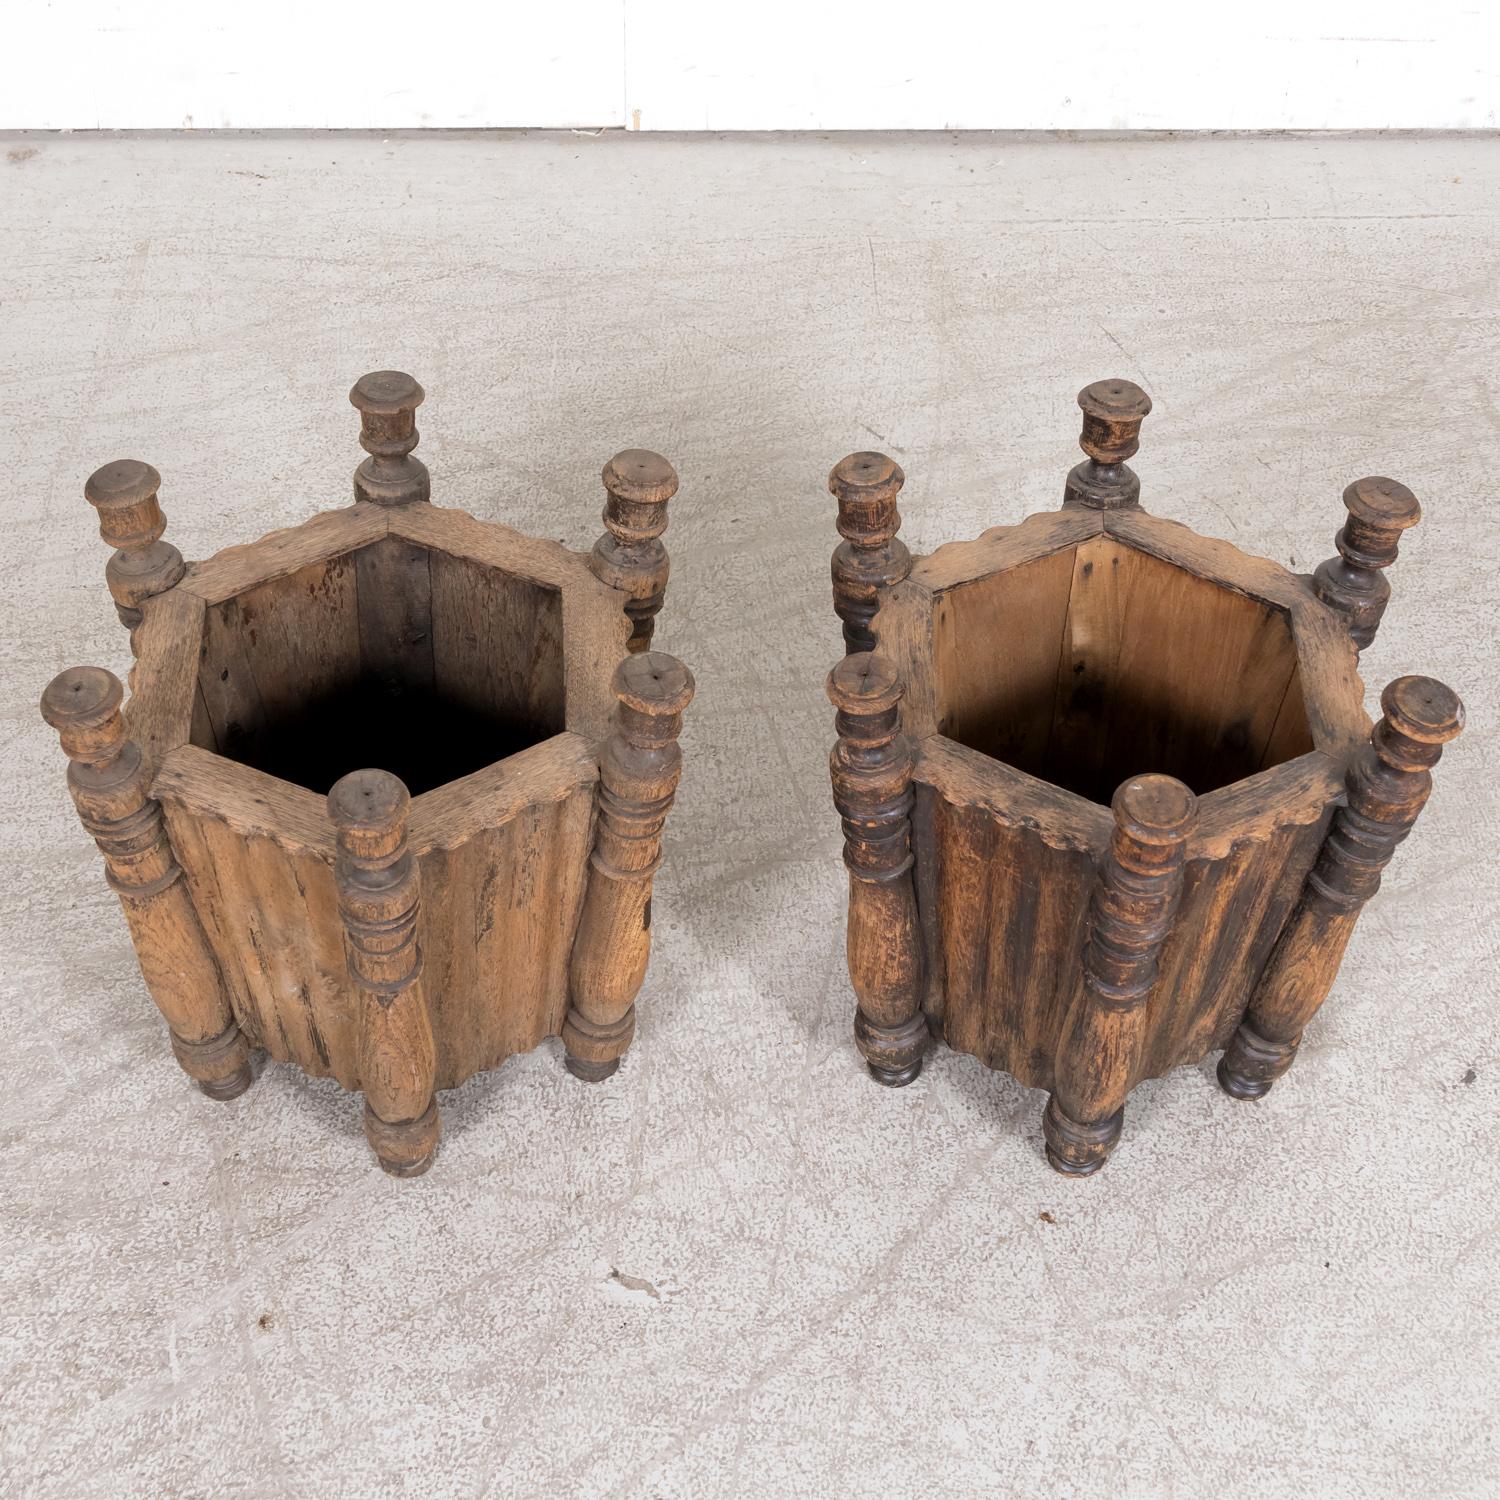 20th Century Pair of Antique French Carved Oak Hexagonal Planters or Jardinieres For Sale